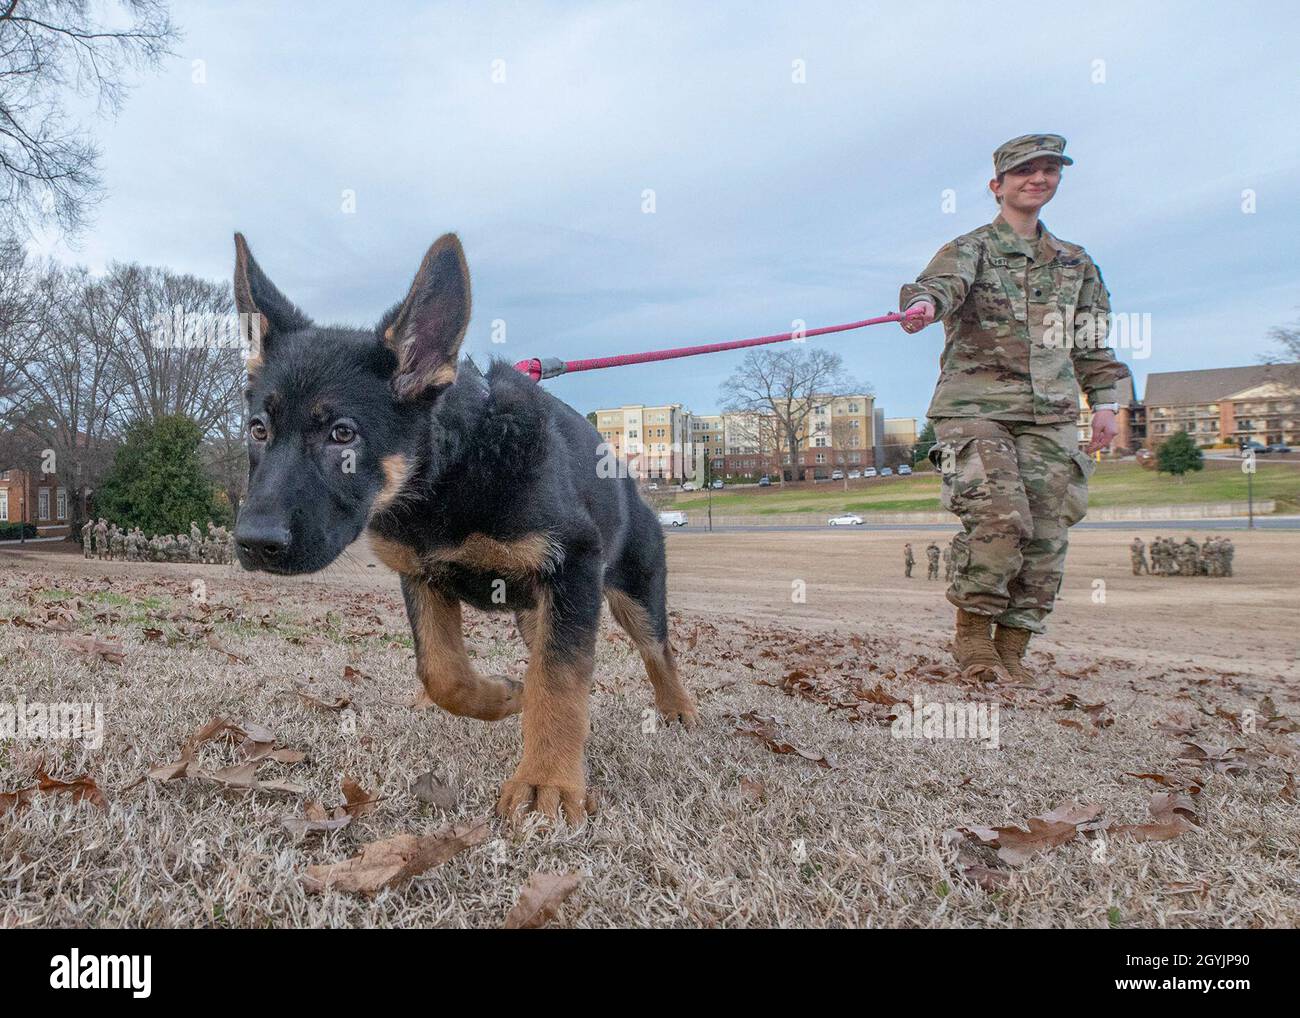 Clemson University Army Reserve Officers’ Training Corps cadet Elizabeth Hite, a senior studying math, walks Cleo the puppy on Clemson’s Bowman Field before an “actions on the objective” field exercise, Jan. 9, 2020. (Photo by Ken Scar) Stock Photo